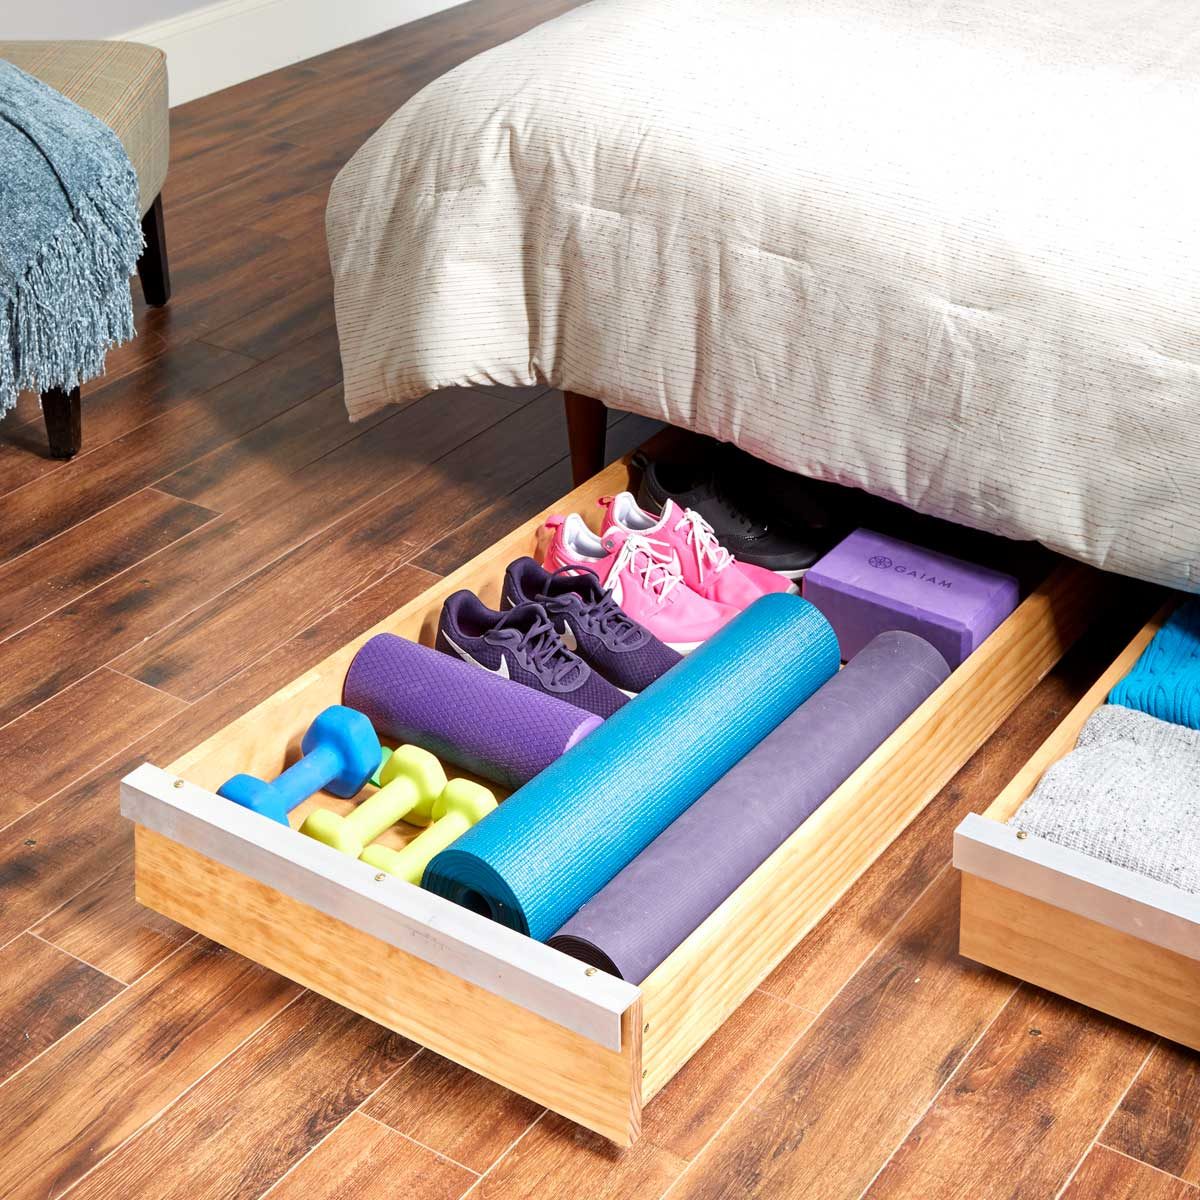 How To Make An Under Bed Storage Drawer The Family Handyman